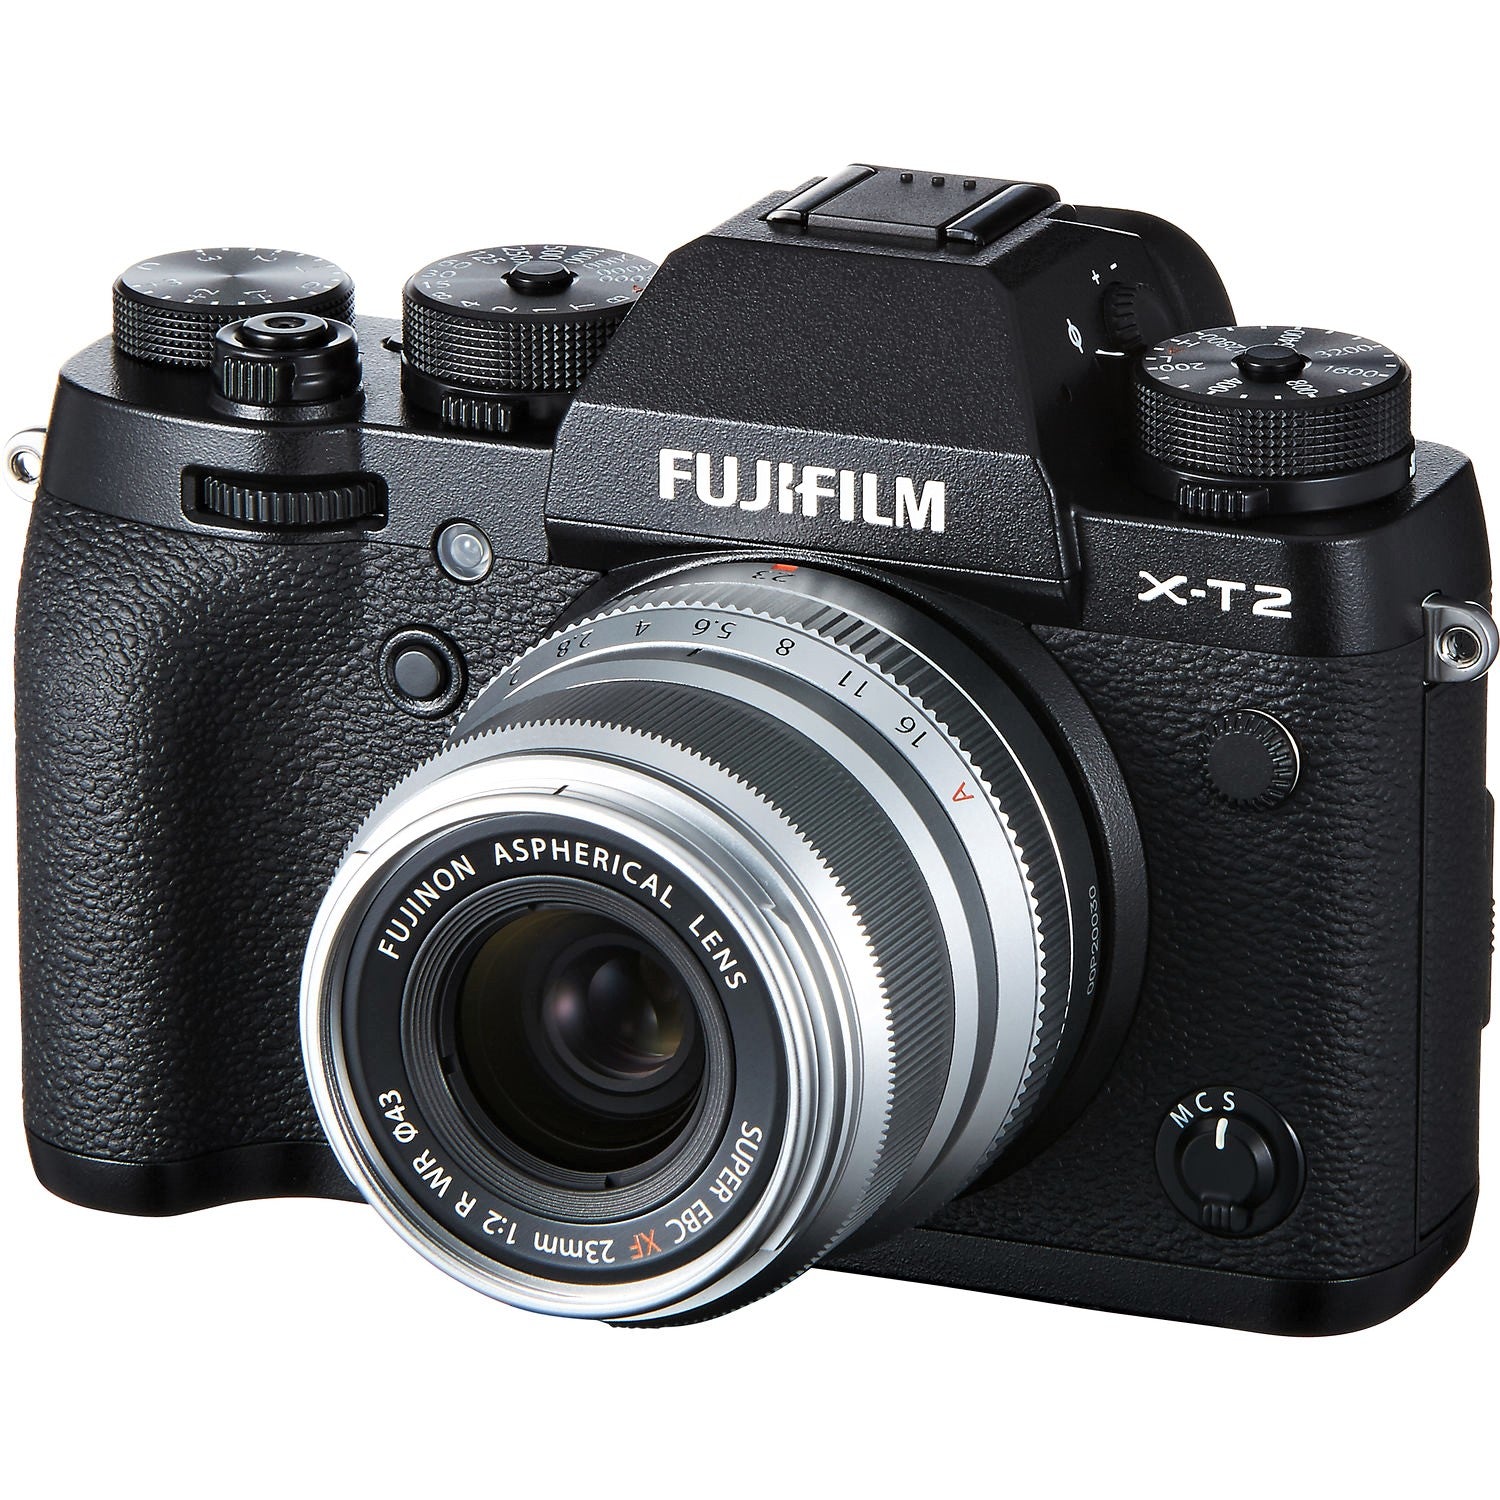 Buy - Fujifilm X100V Compact Camera with 23mm F2.0 lens - silver